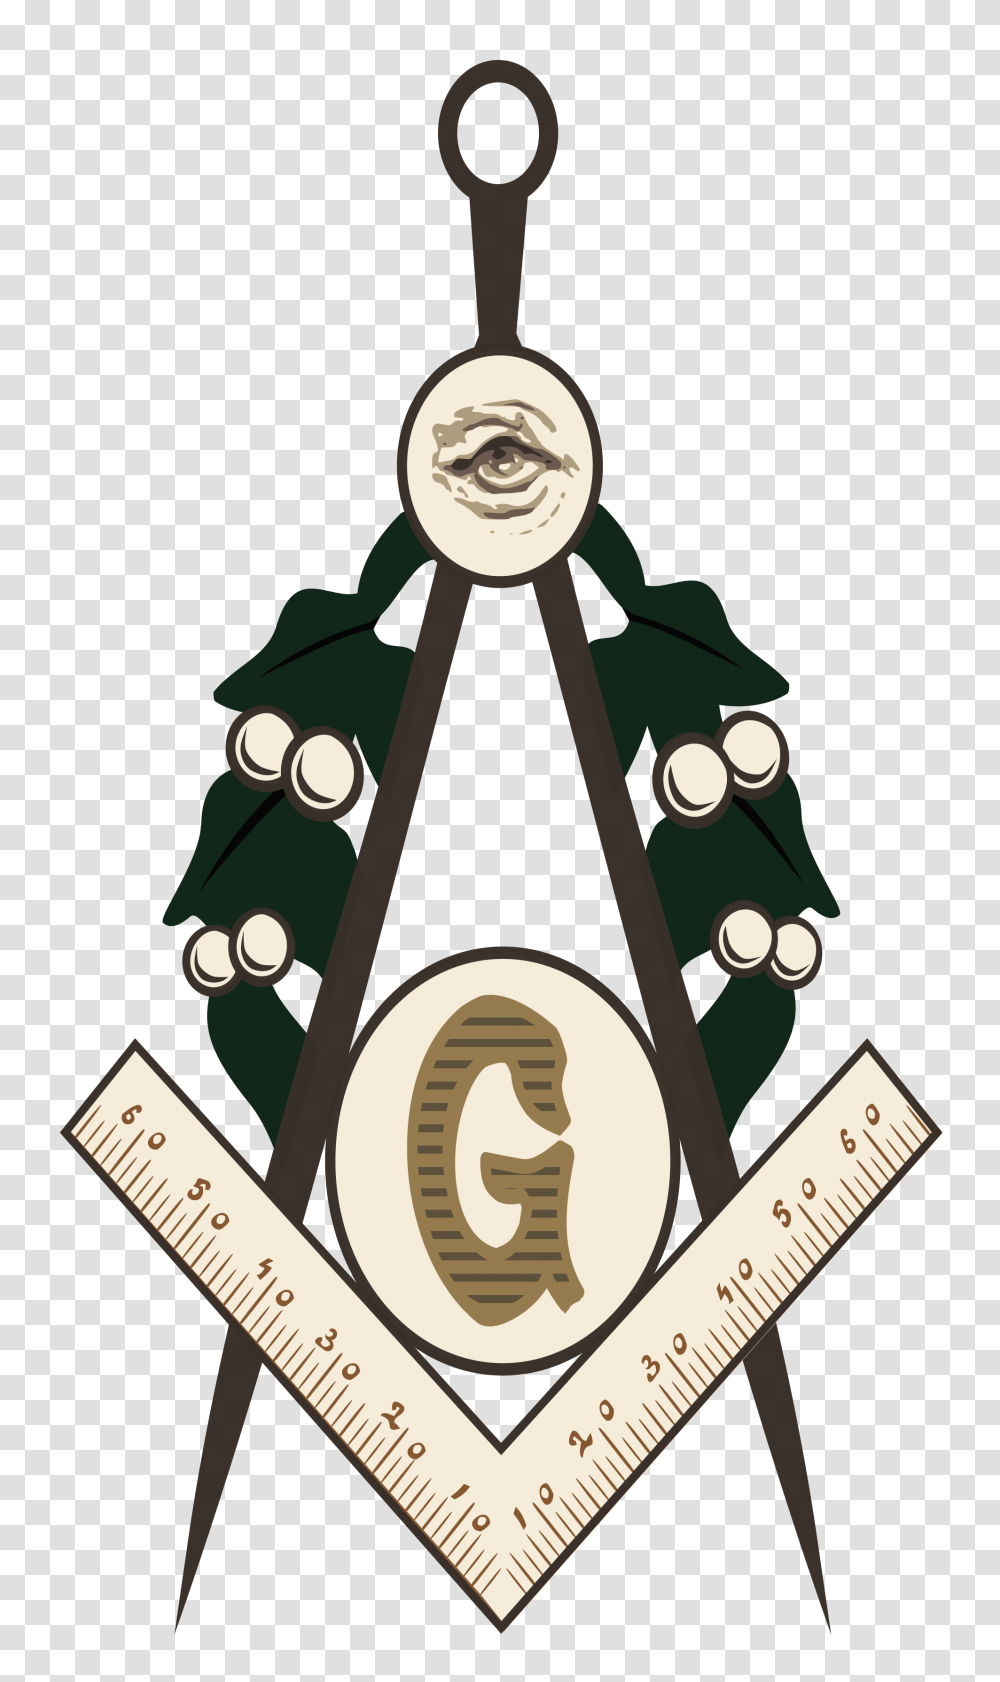 Emblem Of A Masonic Lodge In Sibiu Or Century, Plant, Tree, Fir, Abies Transparent Png